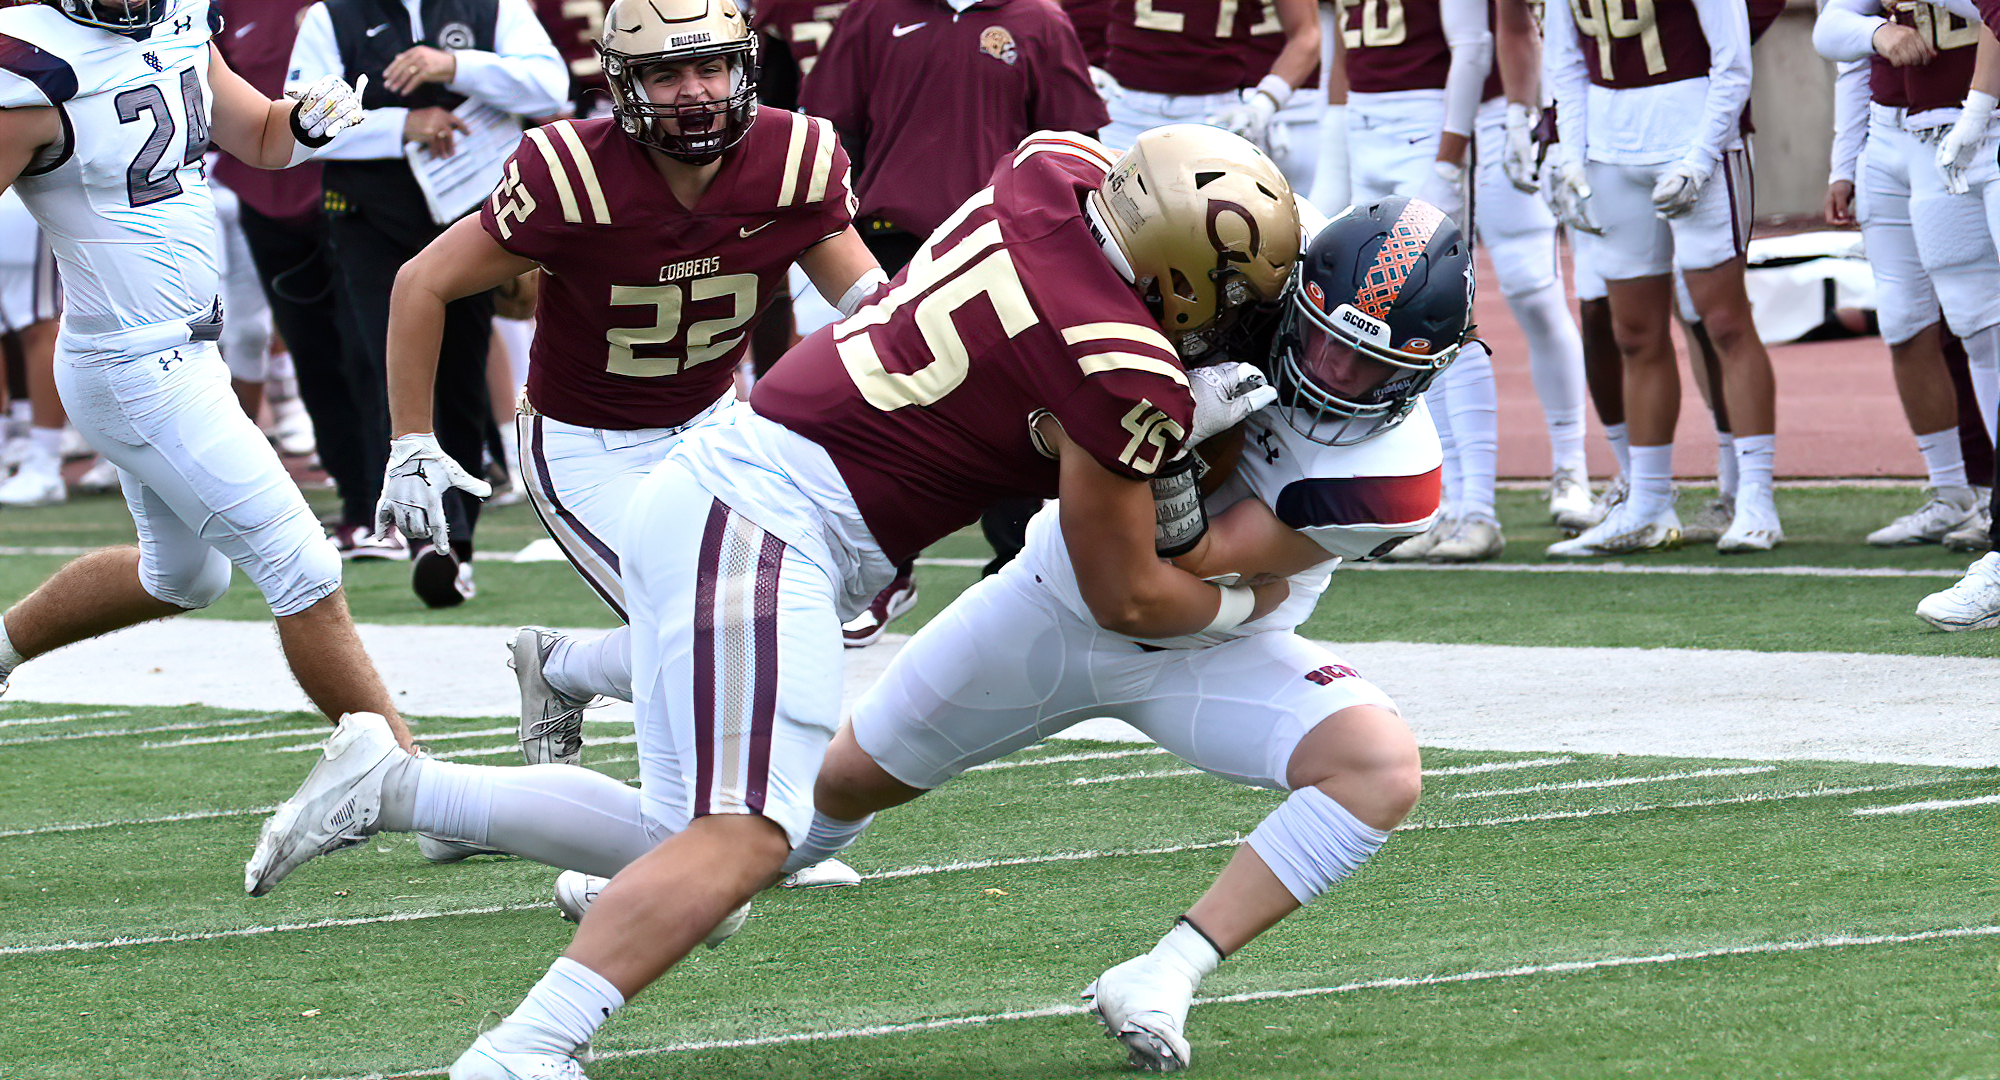 Senior linebacker PJ Parmelee ha a team-high 13 tackles in the Cobbers' game at Bethel.